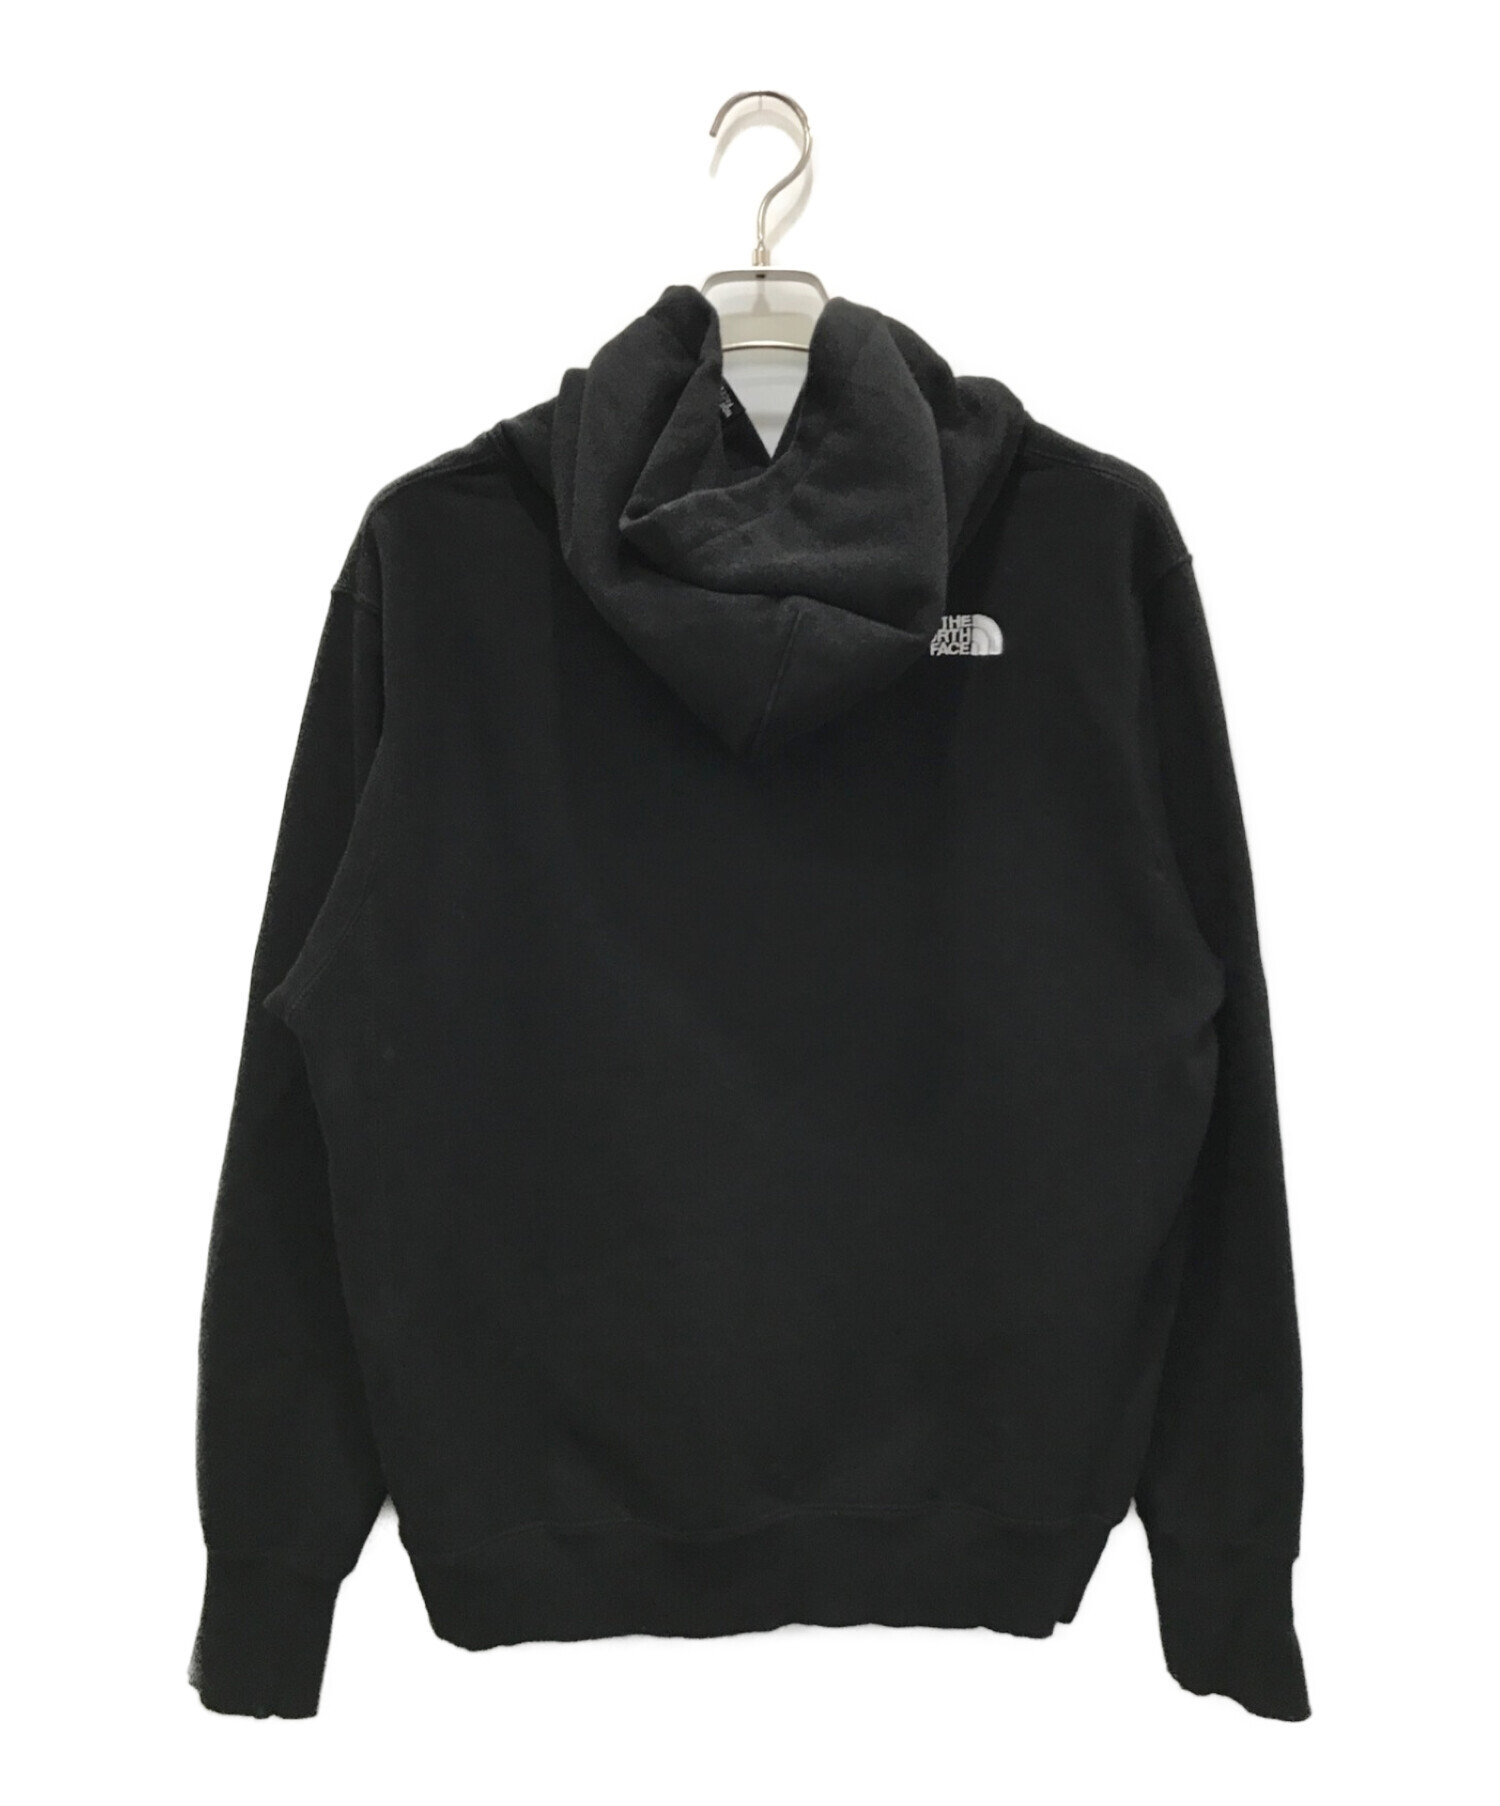 the north face square logo big hoodie